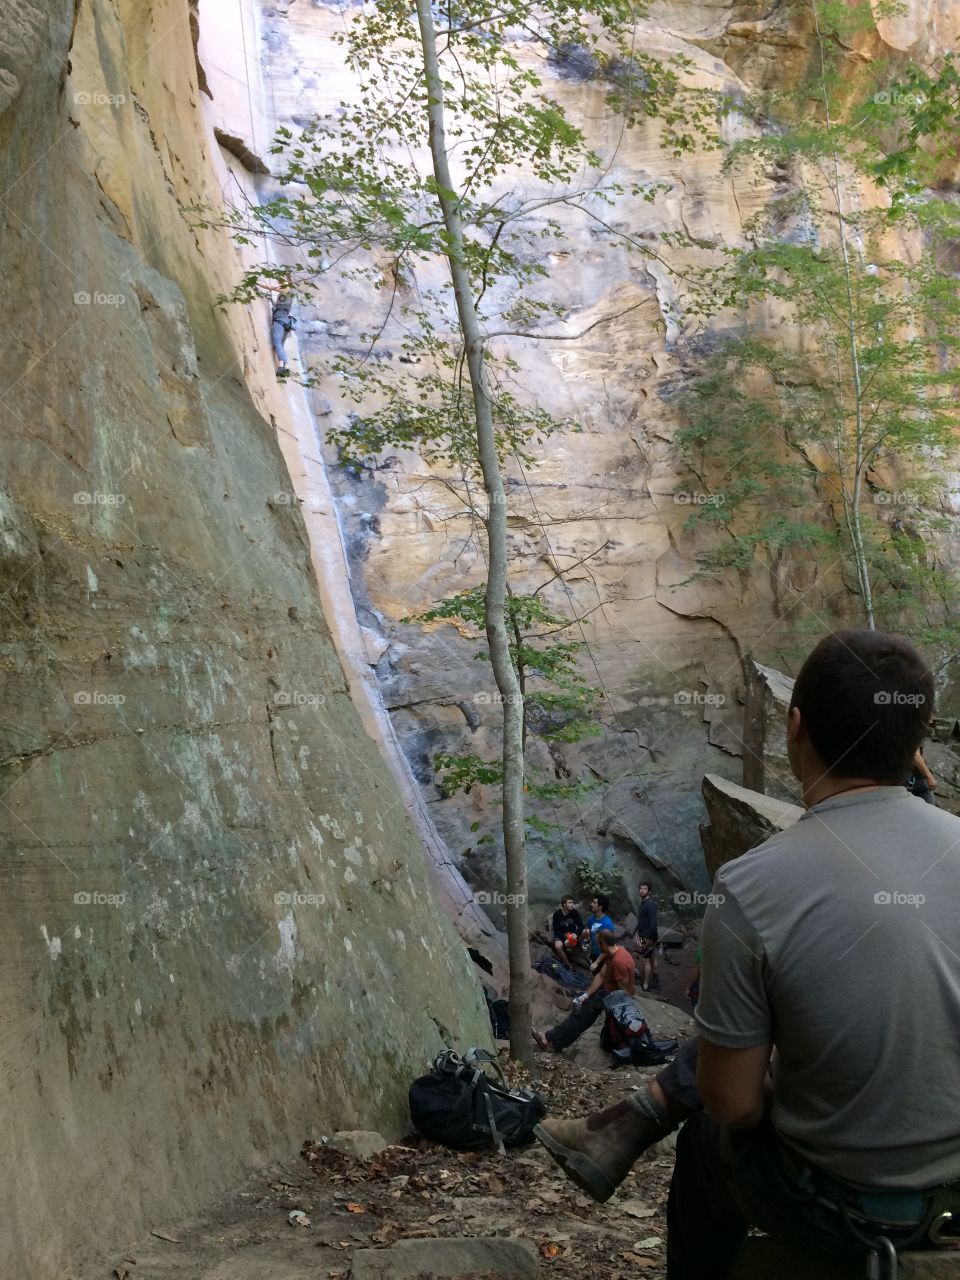 Relaxing between climbs at the Red River Gorge